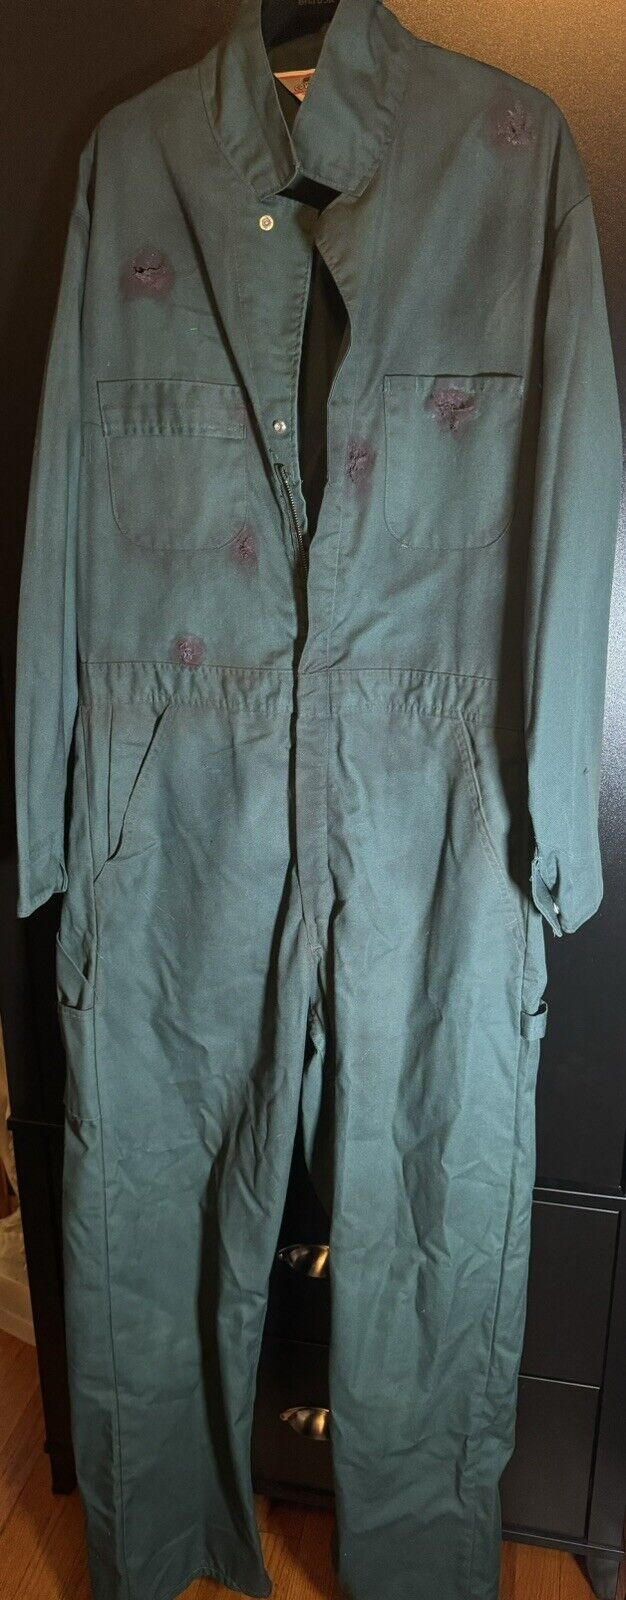 Halloween 2 1981 Sears Michael Myers No Mask COVERALLS Size 42R